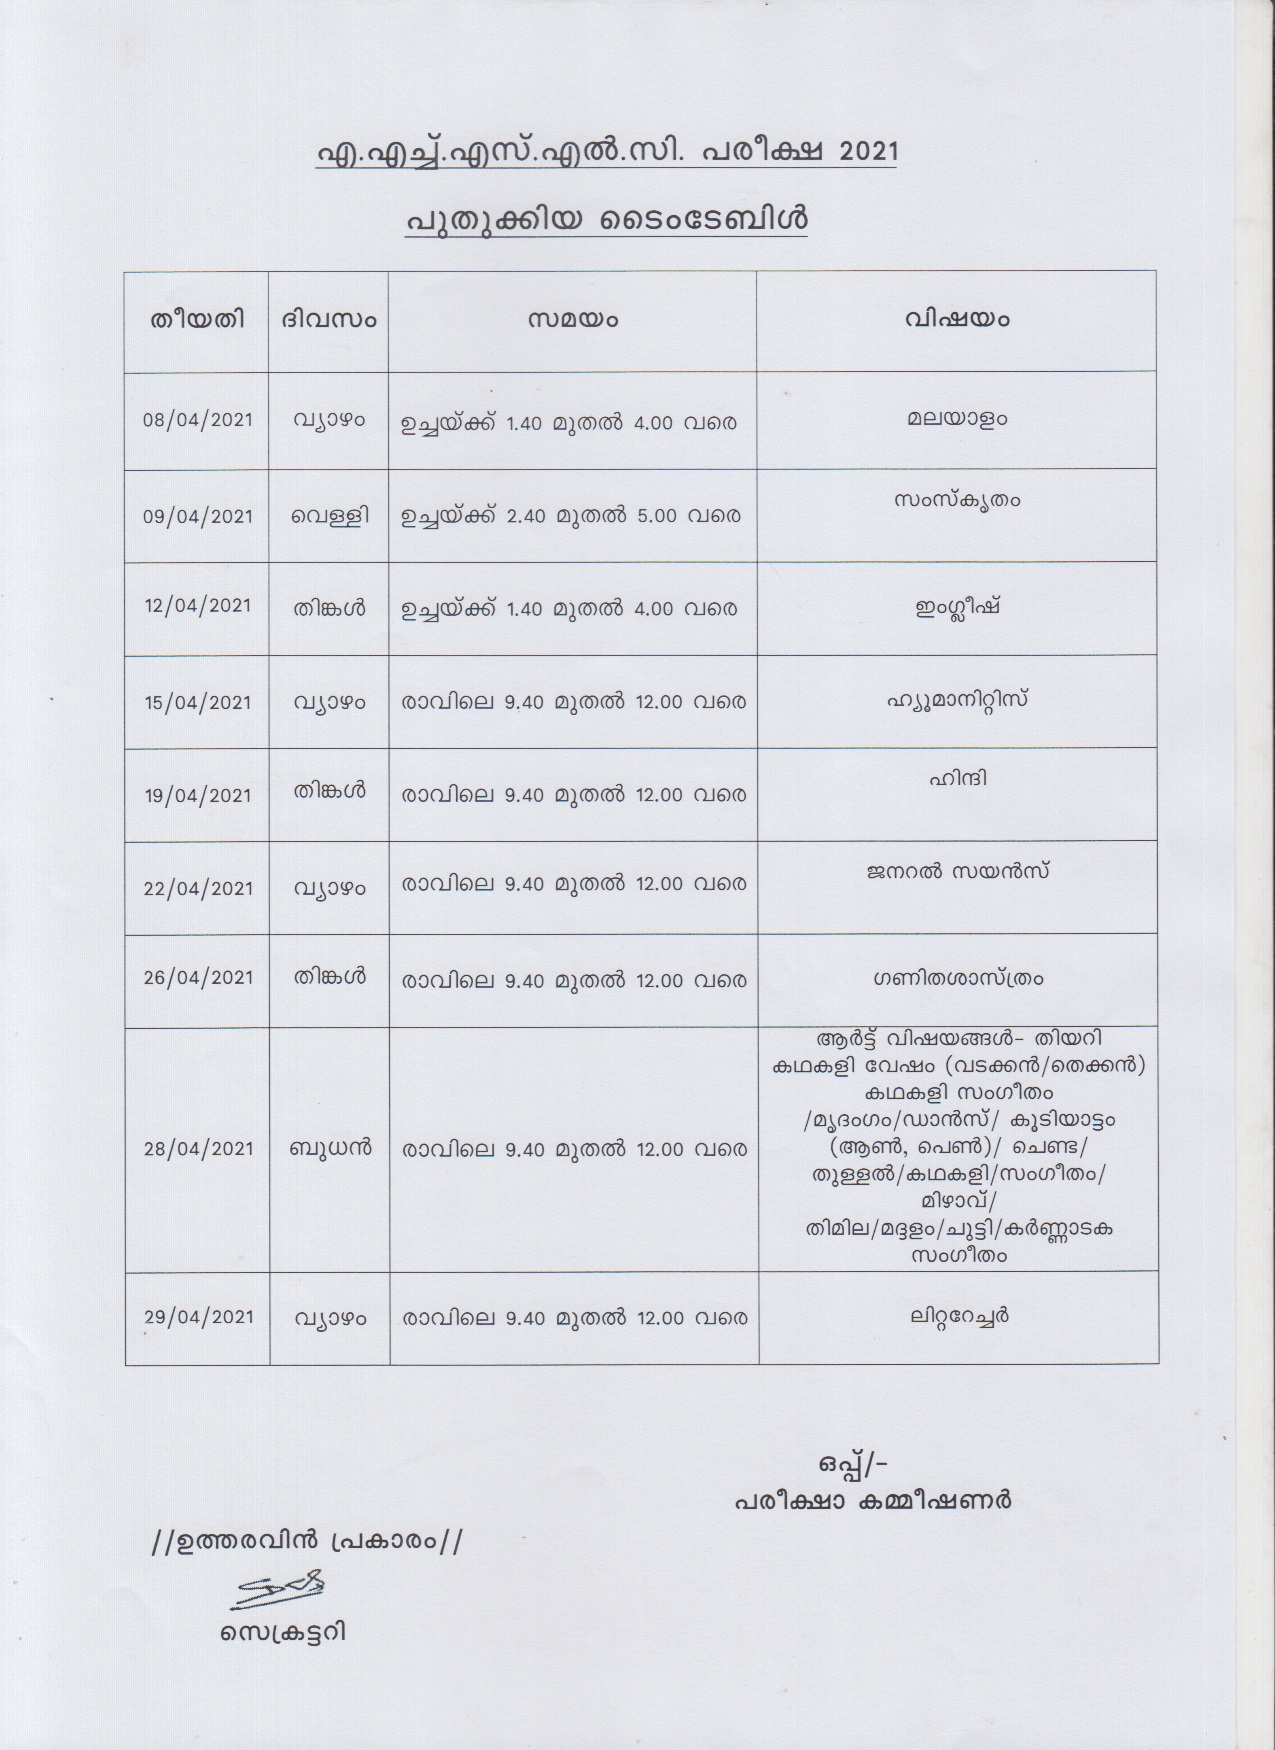 SSLC and THSLC March 2021 Revised Timetable - Notification Image 5